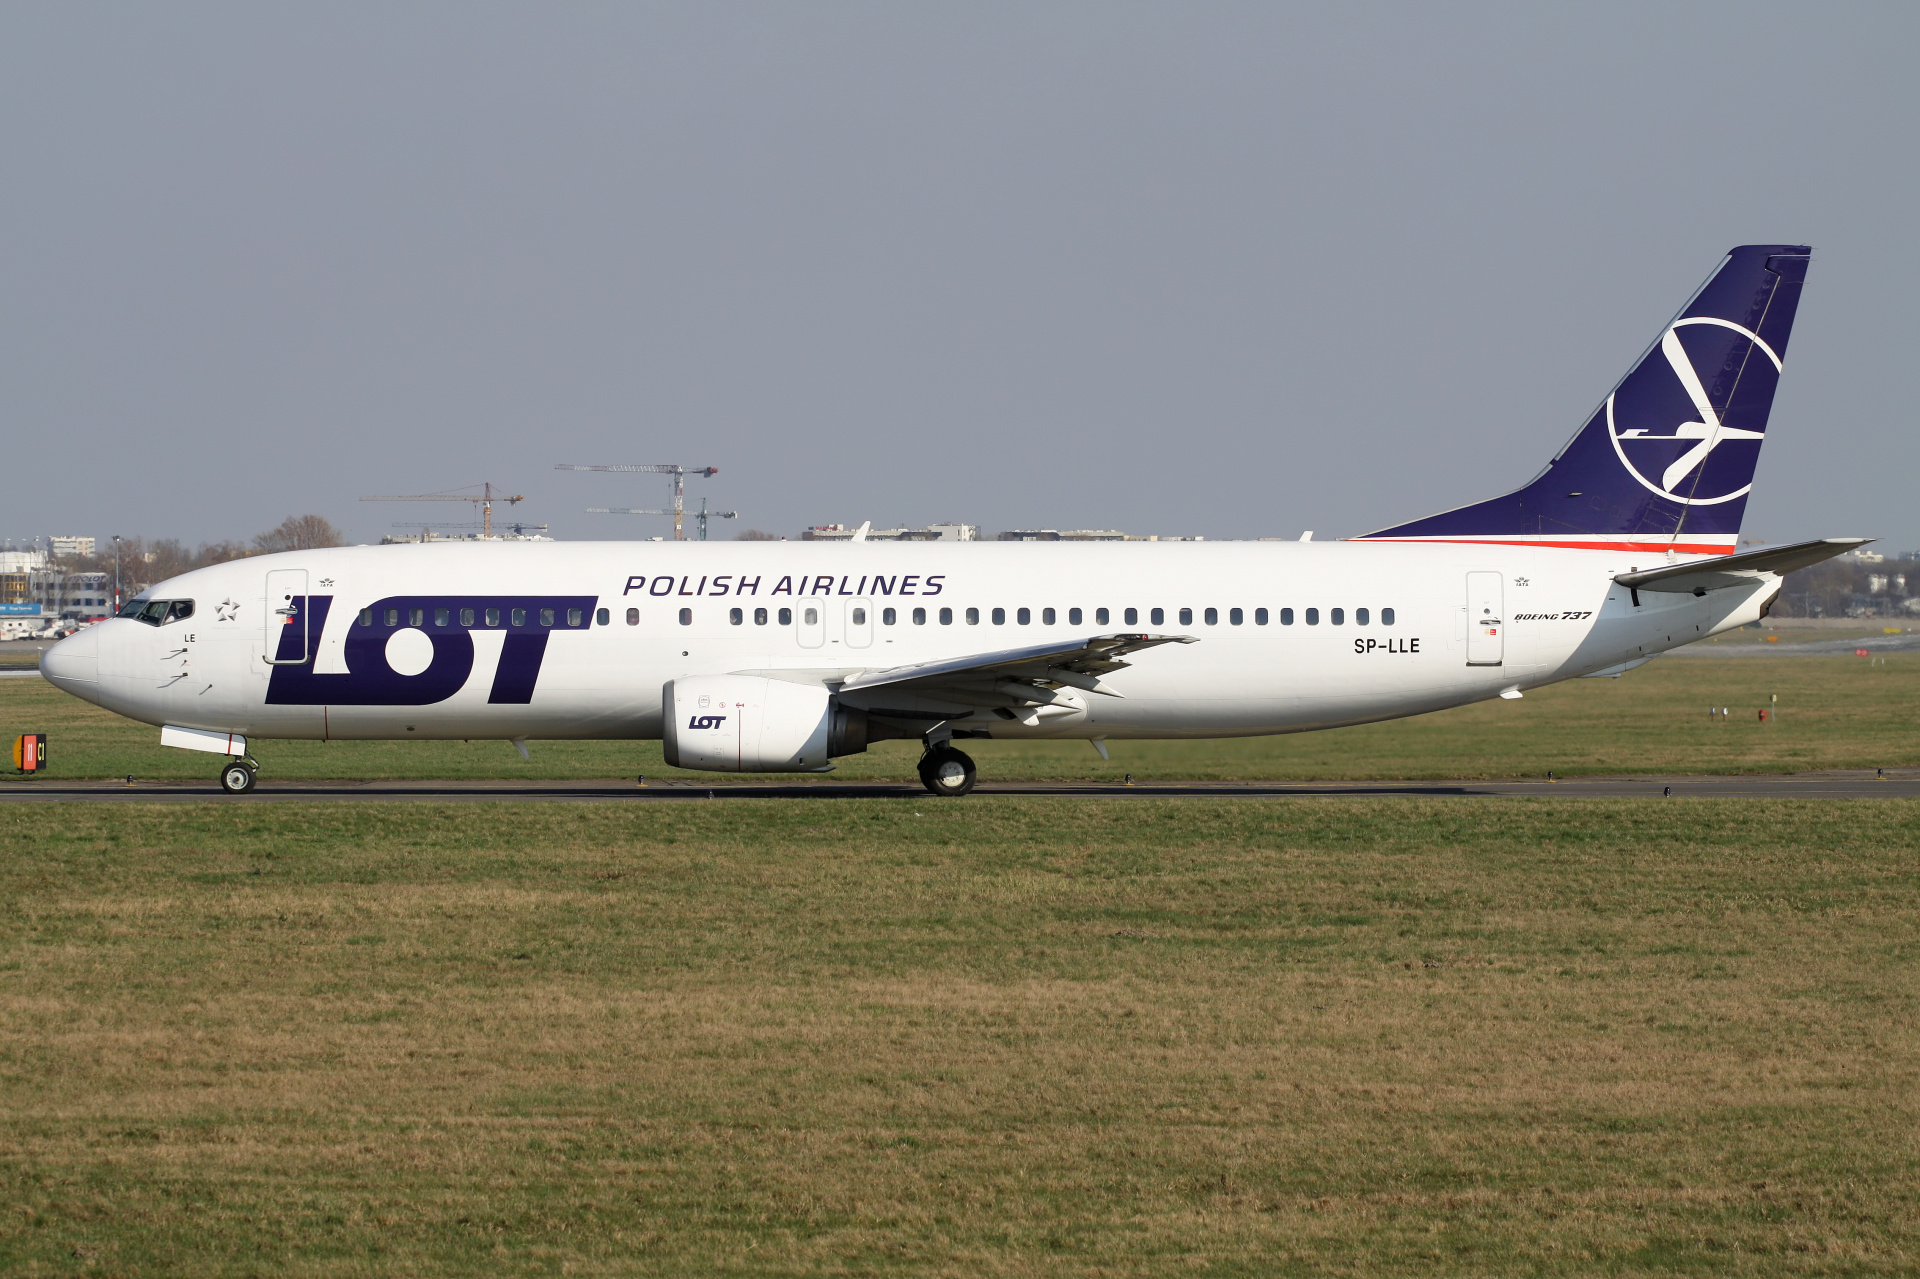 SP-LLE (Aircraft » EPWA Spotting » Boeing 737-400 » LOT Polish Airlines)